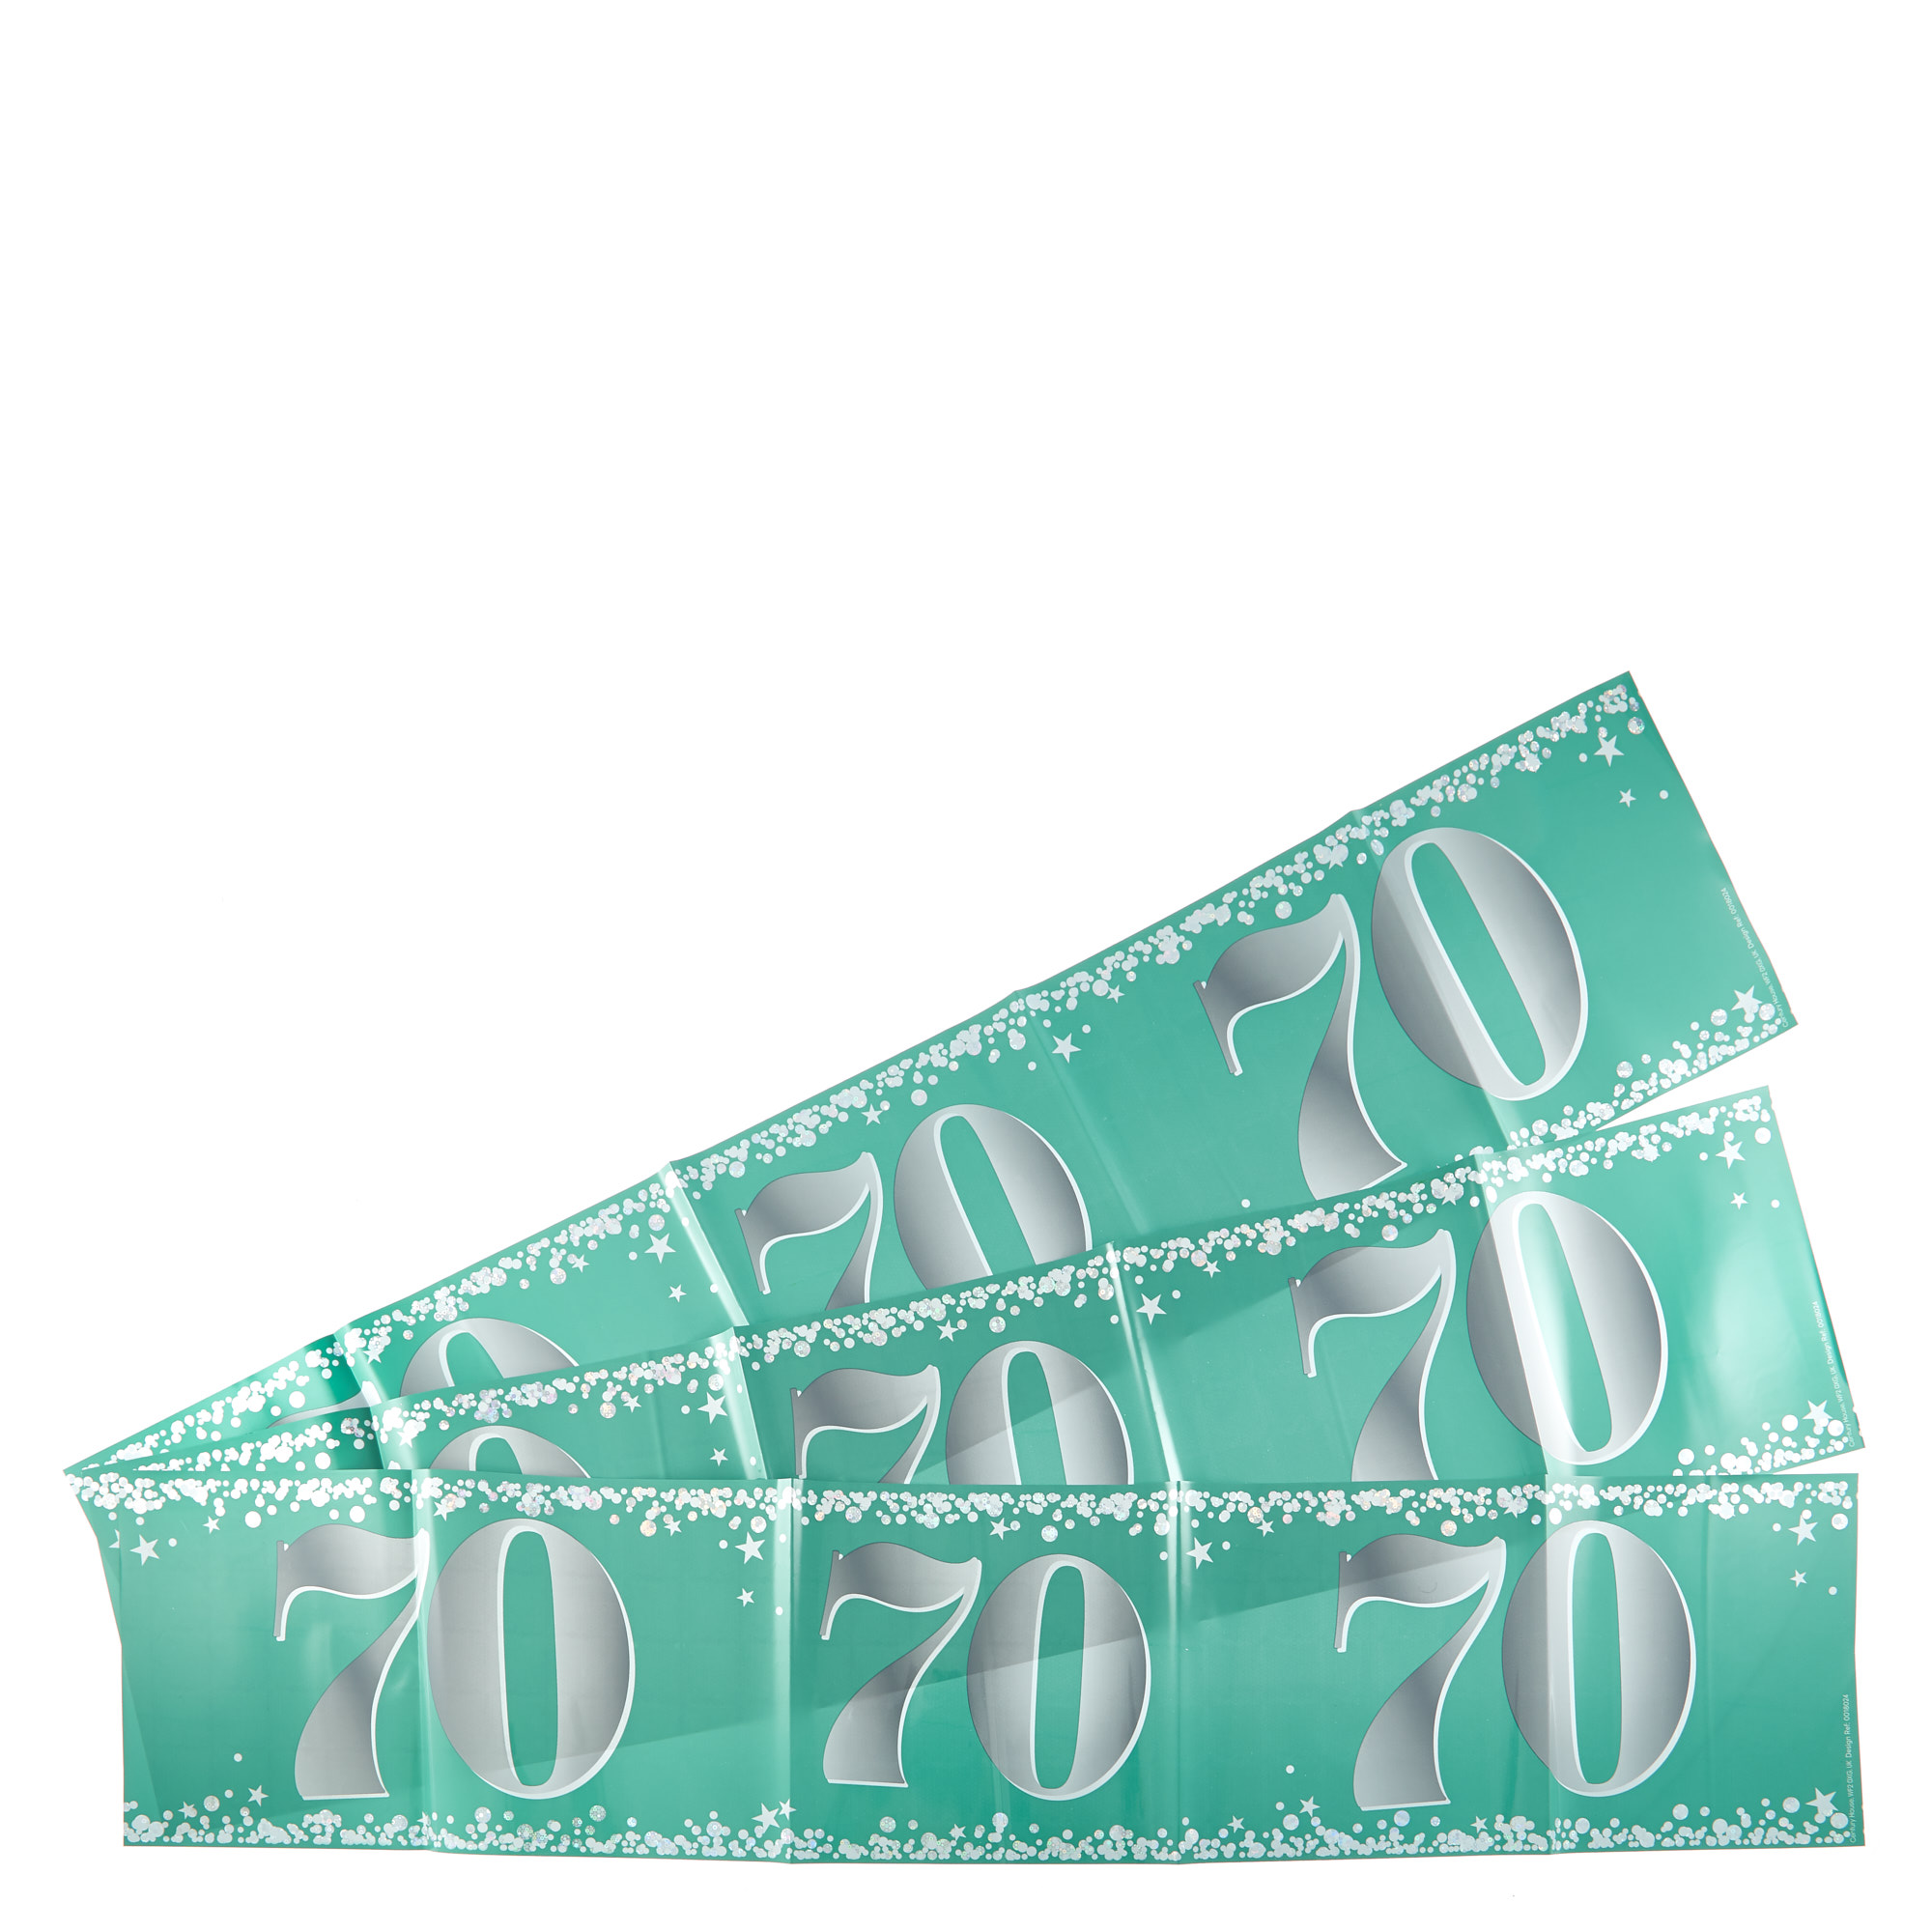 Holographic 70th Birthday Party Banners - Pack Of 3 